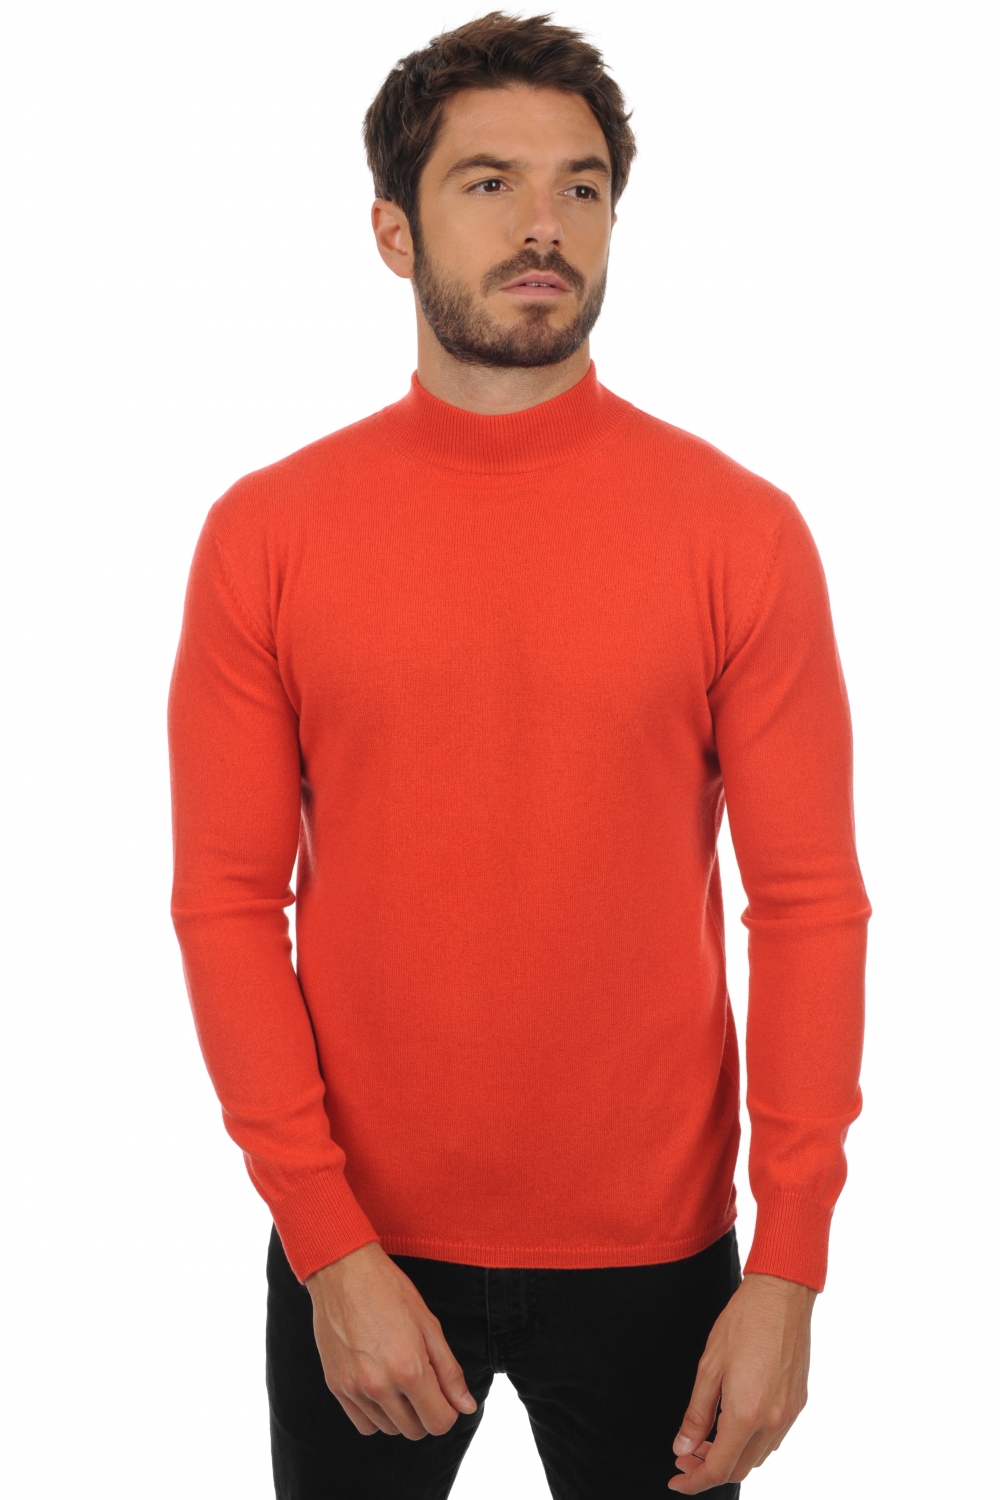 Cachemire pull homme col roule frederic corail lumineux 4xl